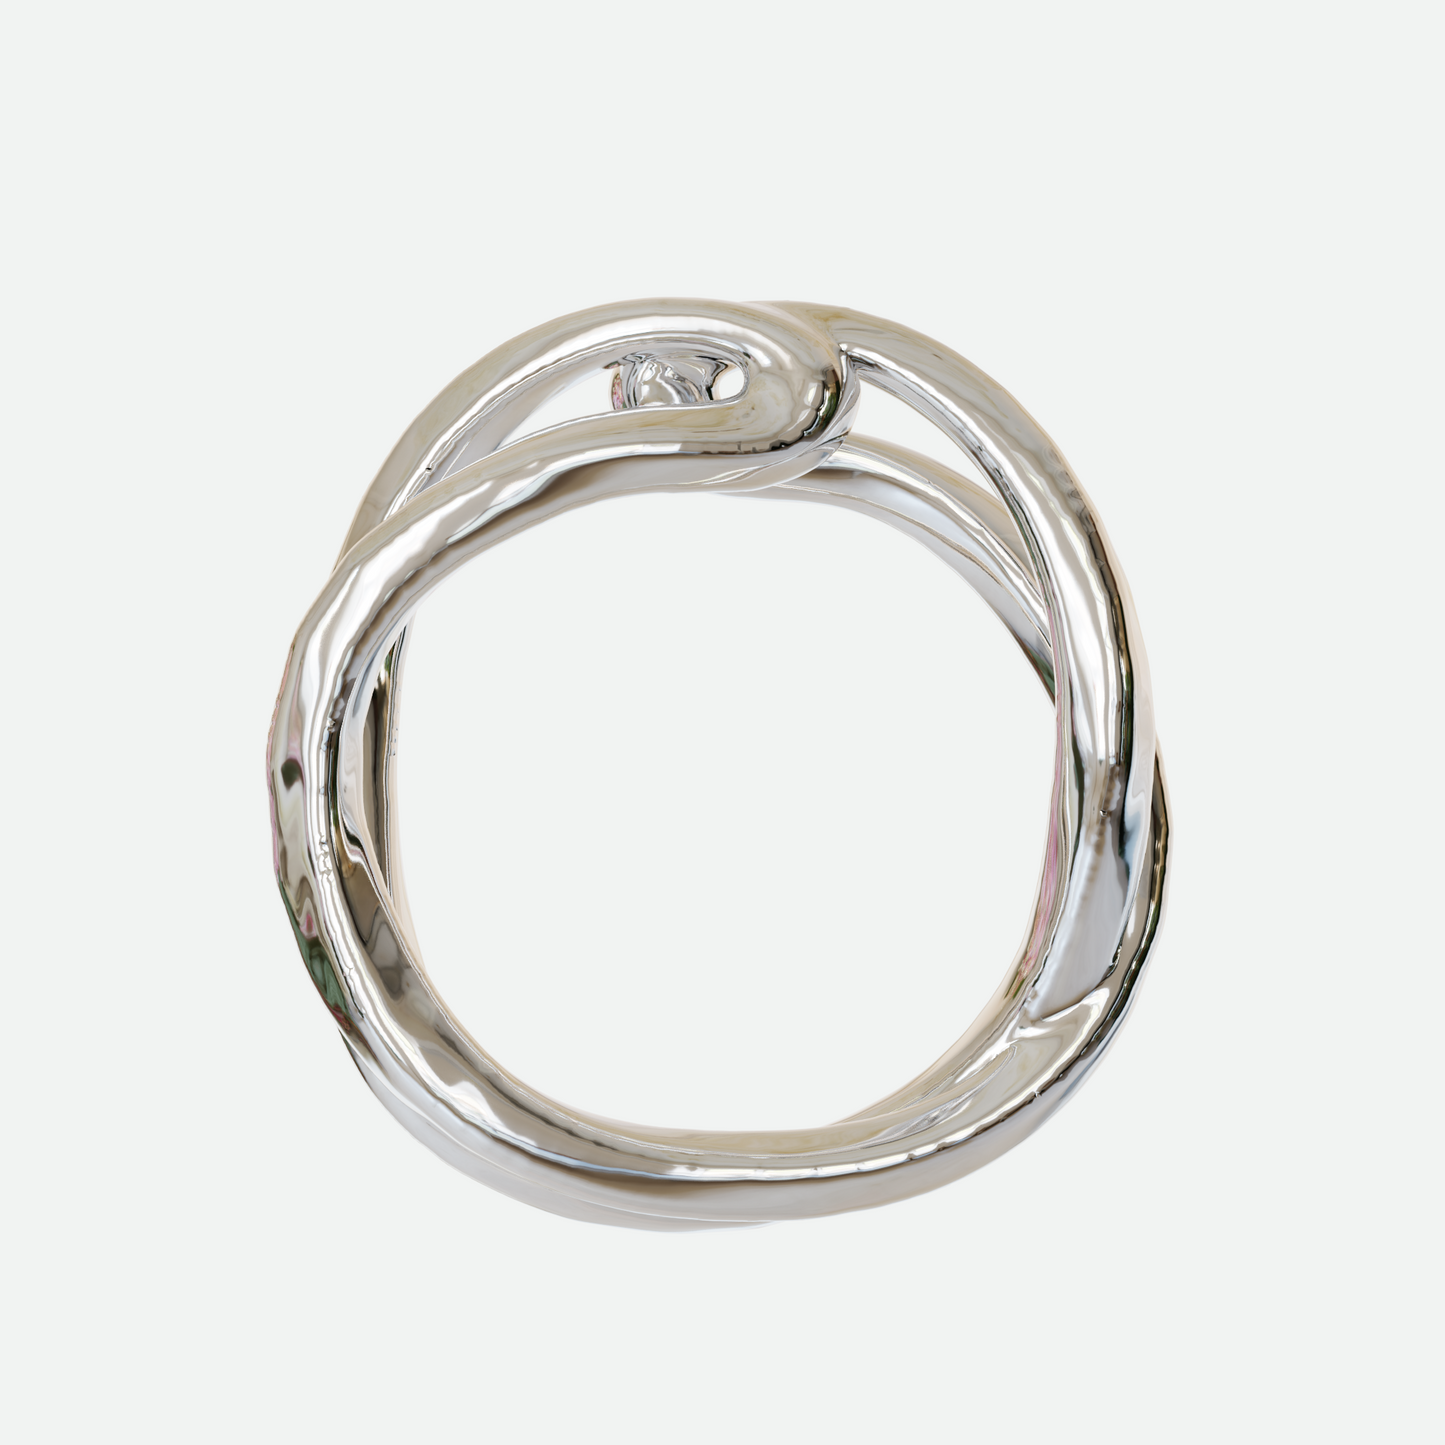 Implico ring in polished silver, where two forms intertwine and touch at the center, showcasing an interplay of shapes, designed by Ruggeri.